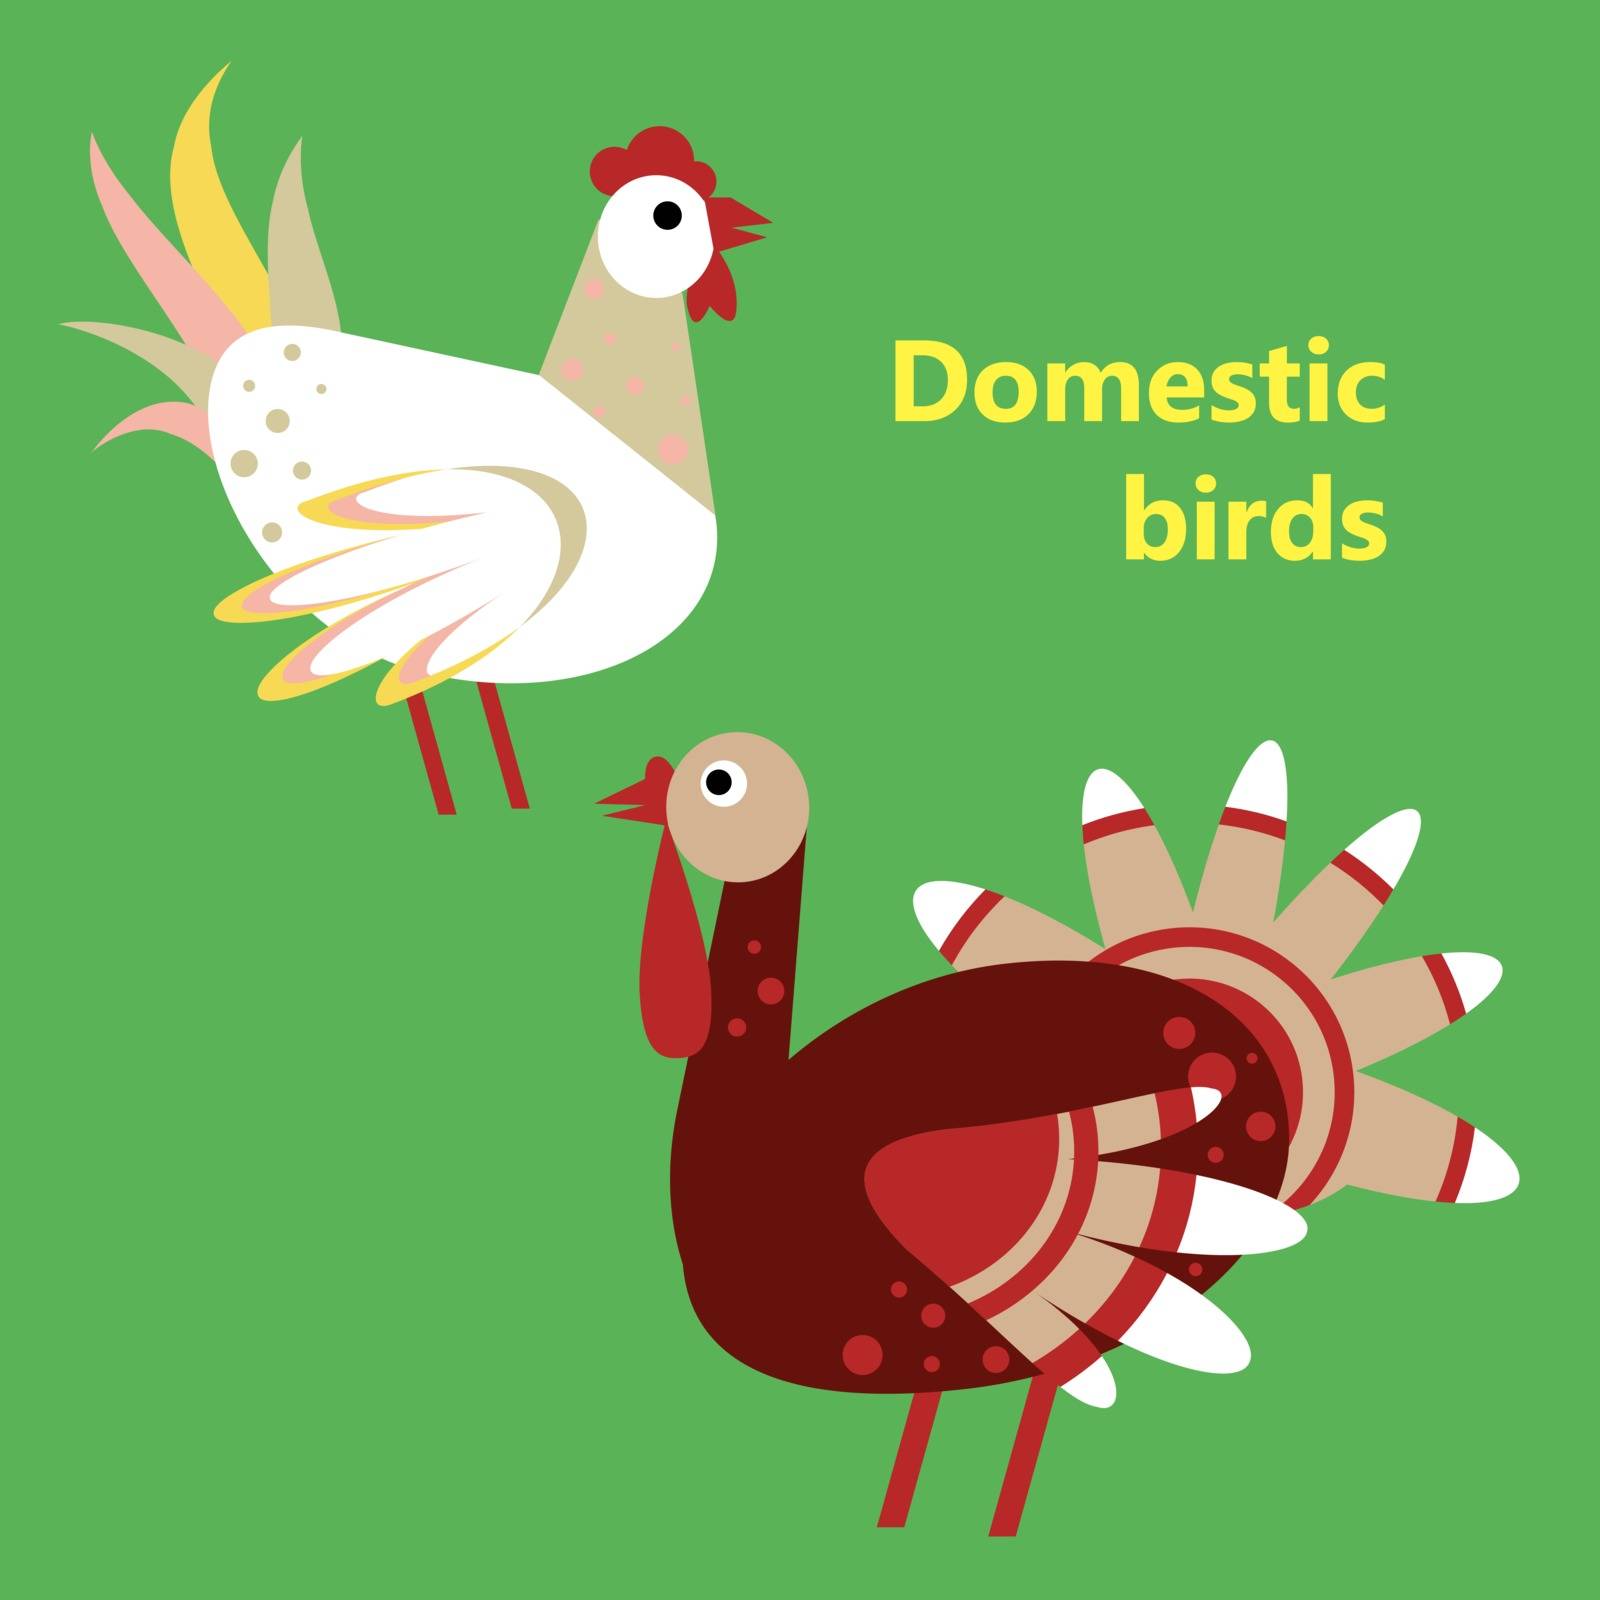 The Domestic birds rooster and turkey on simple color background. Educational flashcard for teaching preschool in kindergarten. Colorful flat cartoon style illustration.